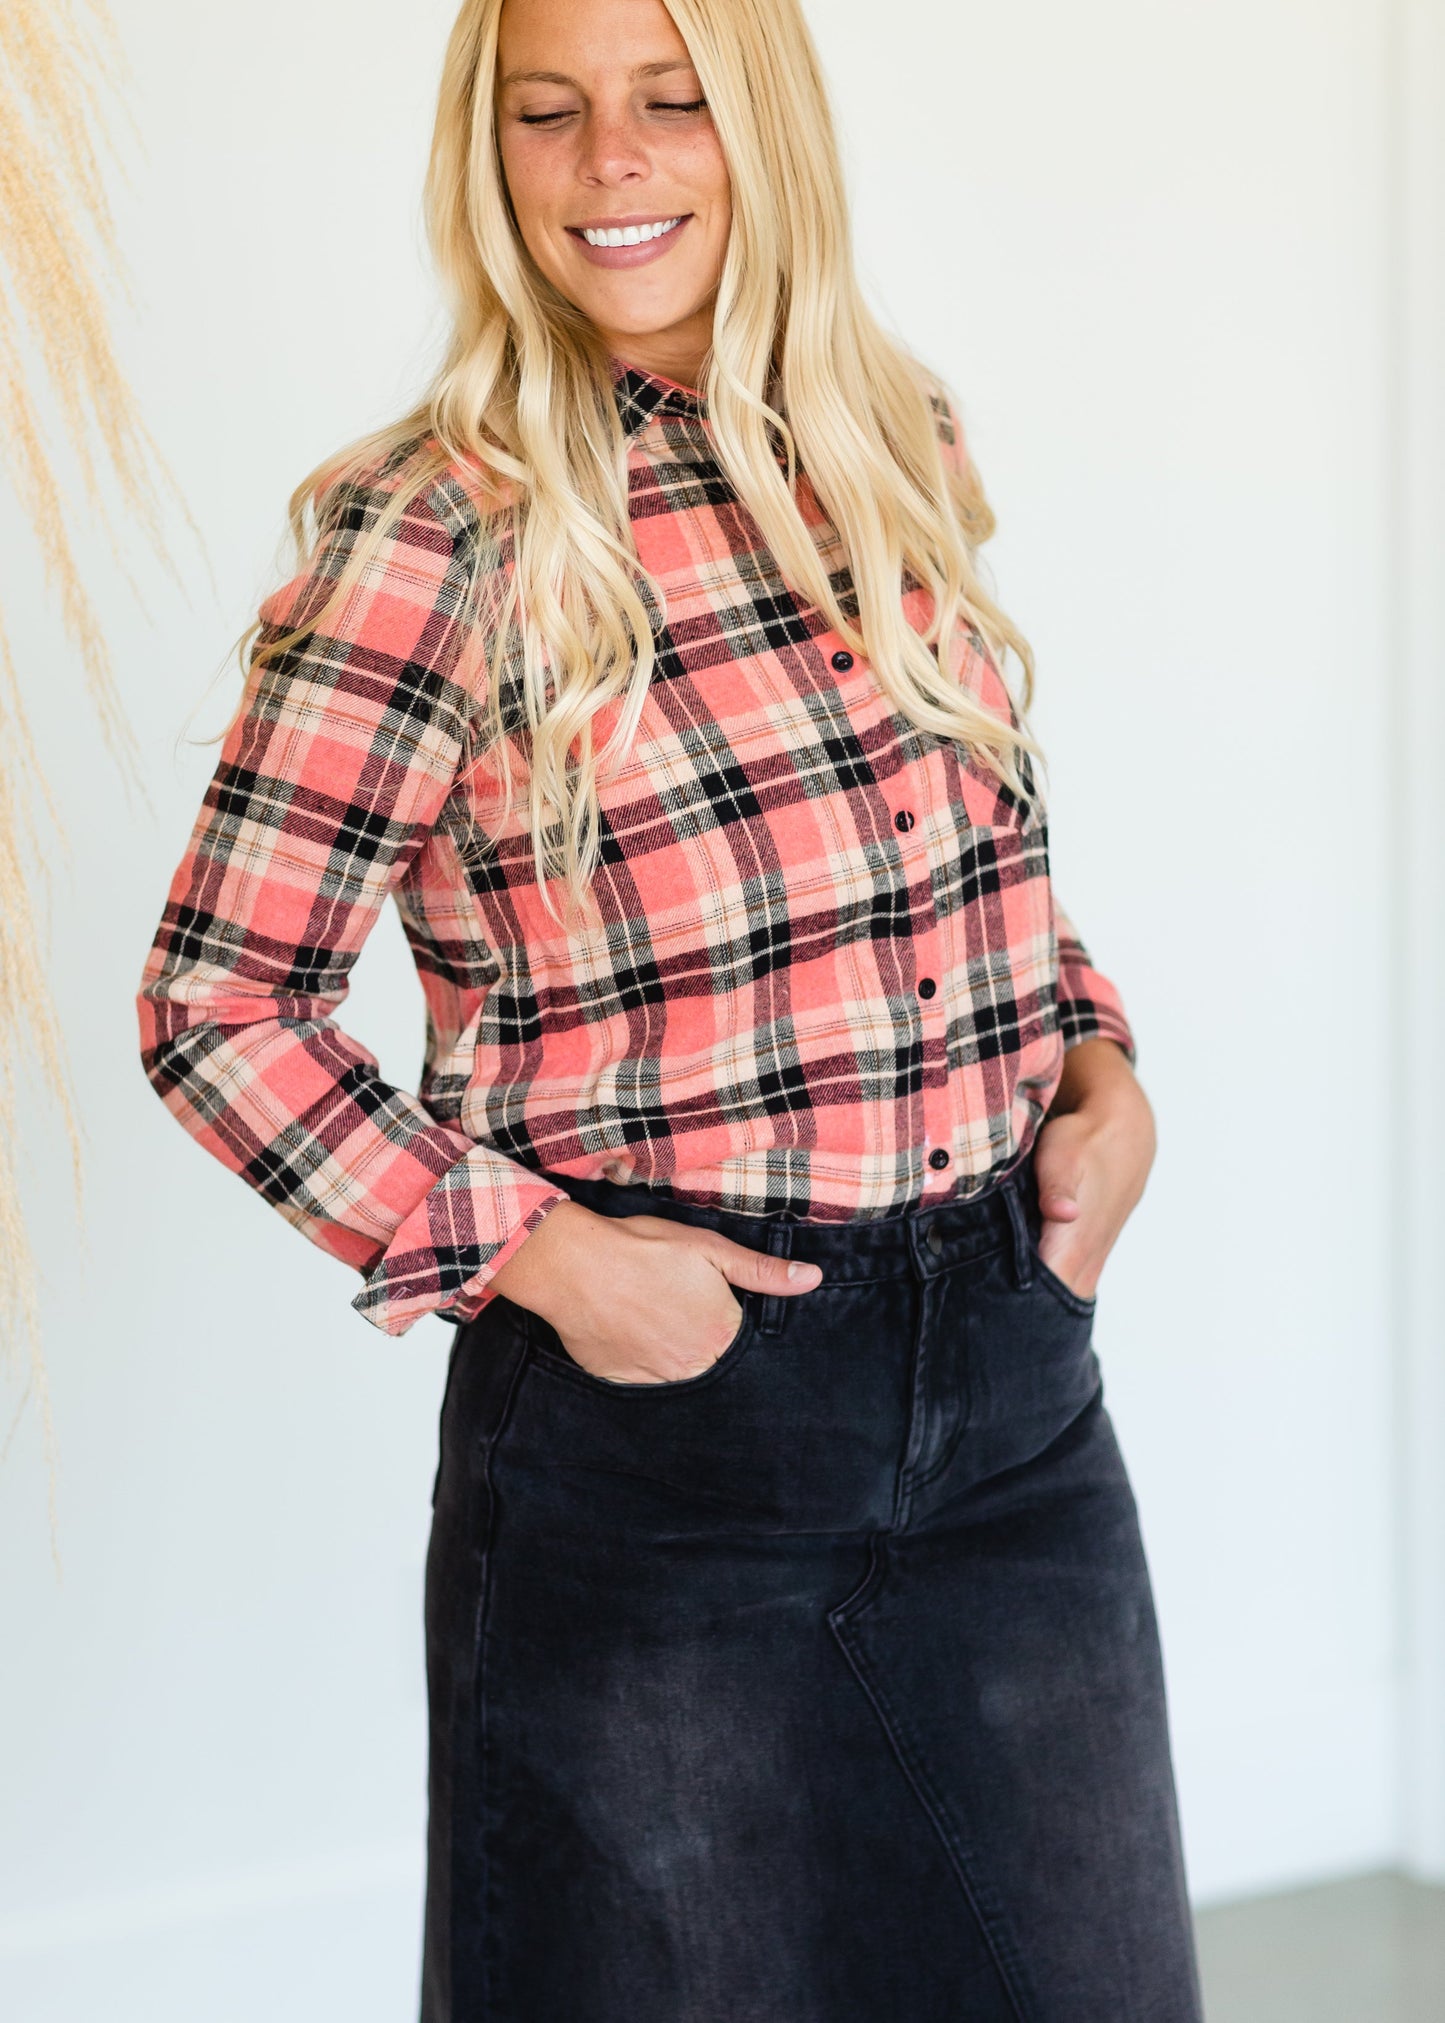 Coral Checkered Plaid Fleece Lined Flannel - FINAL SALE Tops